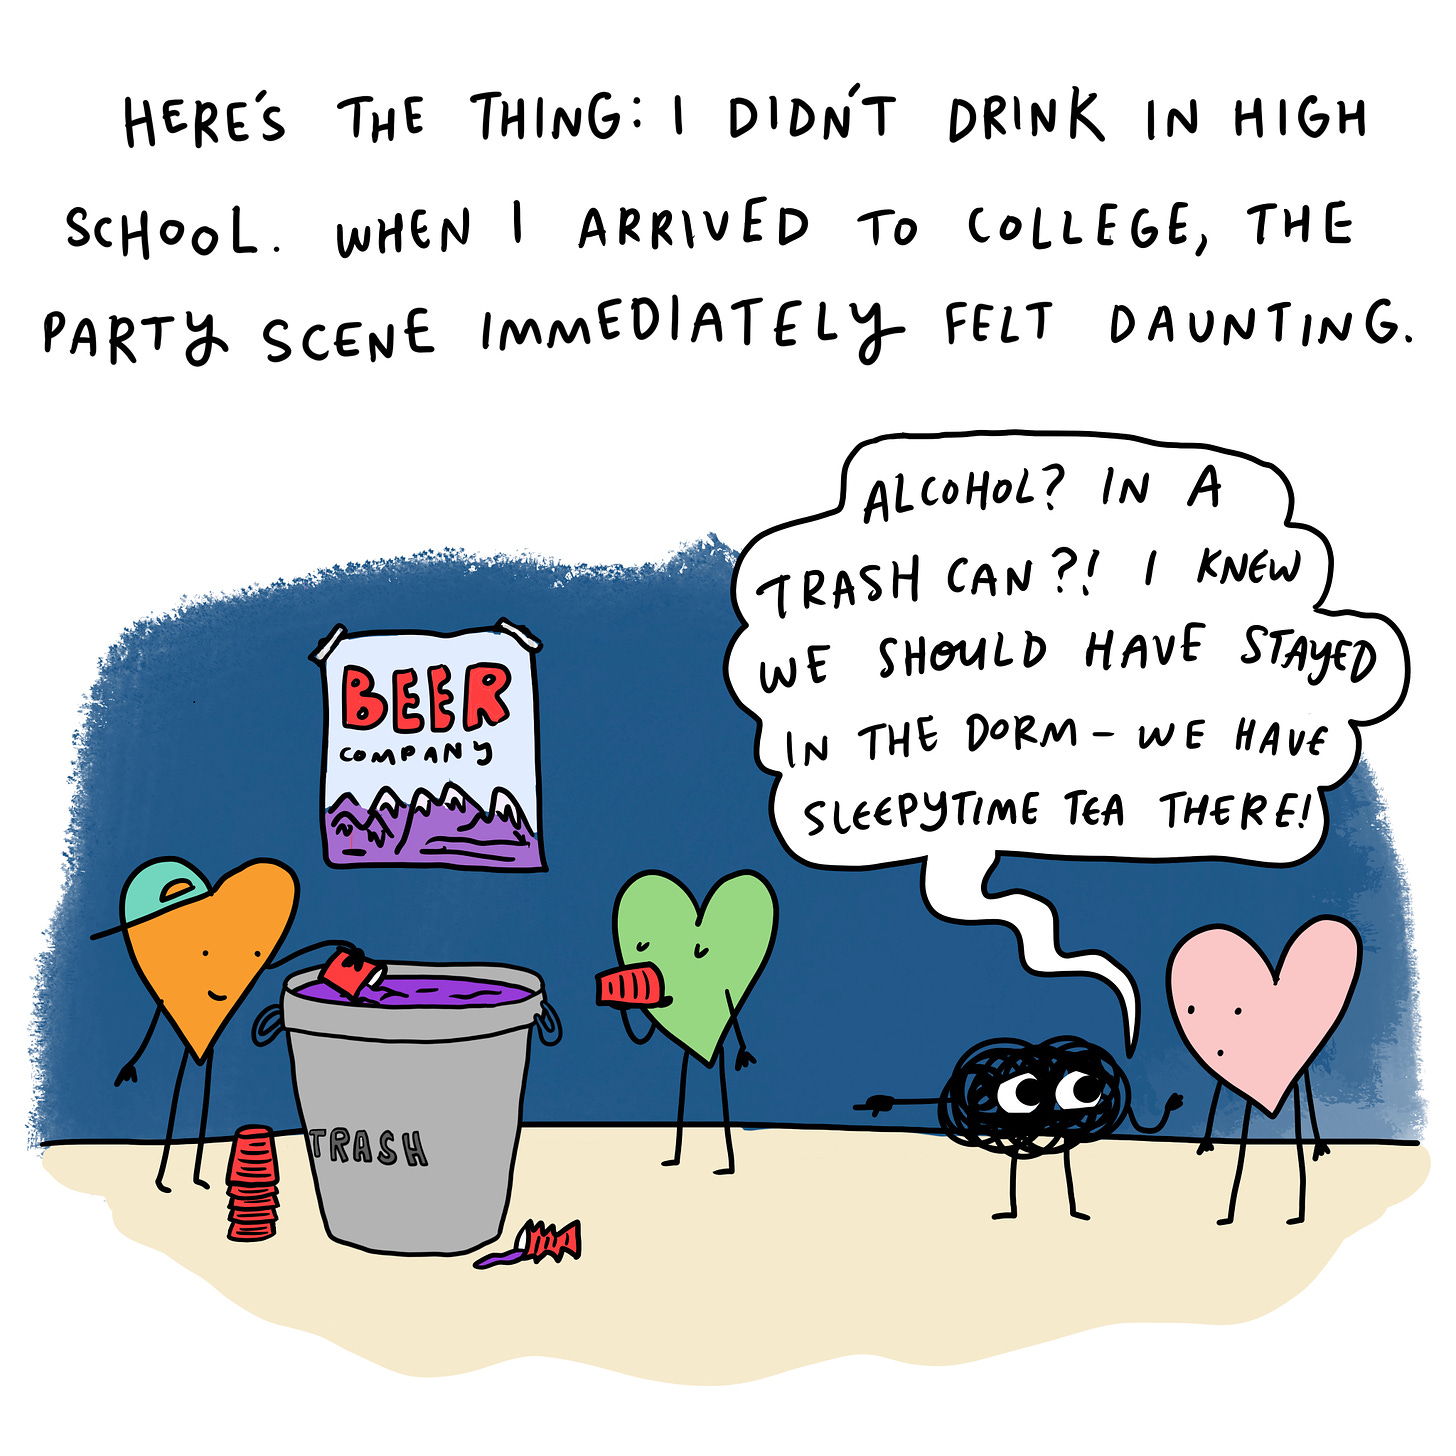 Slide two text: Here’s the thing: I didn’t drink in high school. The party scene in college felt immediately intimidating.  Illustration: Anxiety saying to me: I knew we should’ve stayed in your dorm room! We have blankets and the internet and sleepytime tea there!